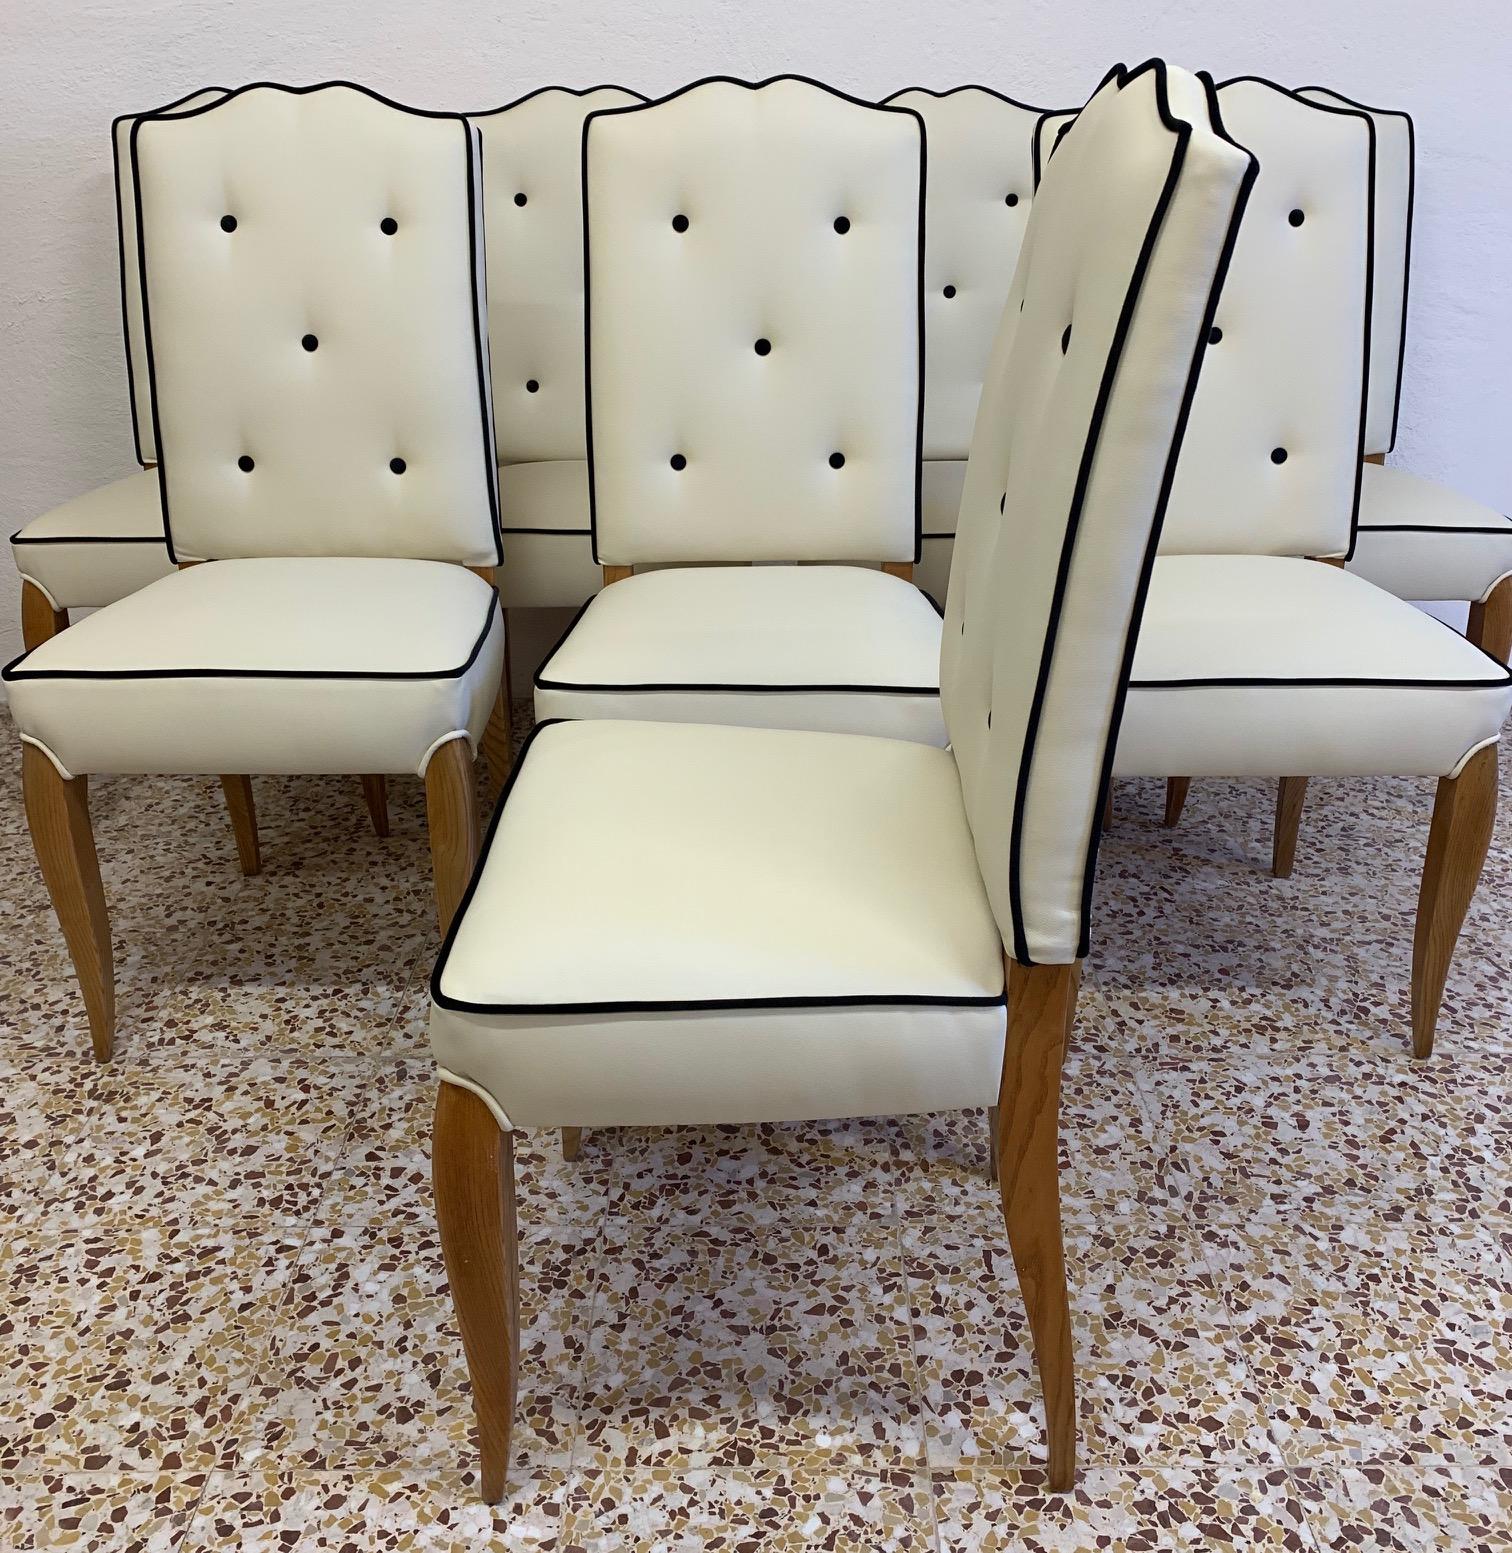 Mid-20th Century Set of 8 French Art Deco Durmast Dining Chairs, 1930s